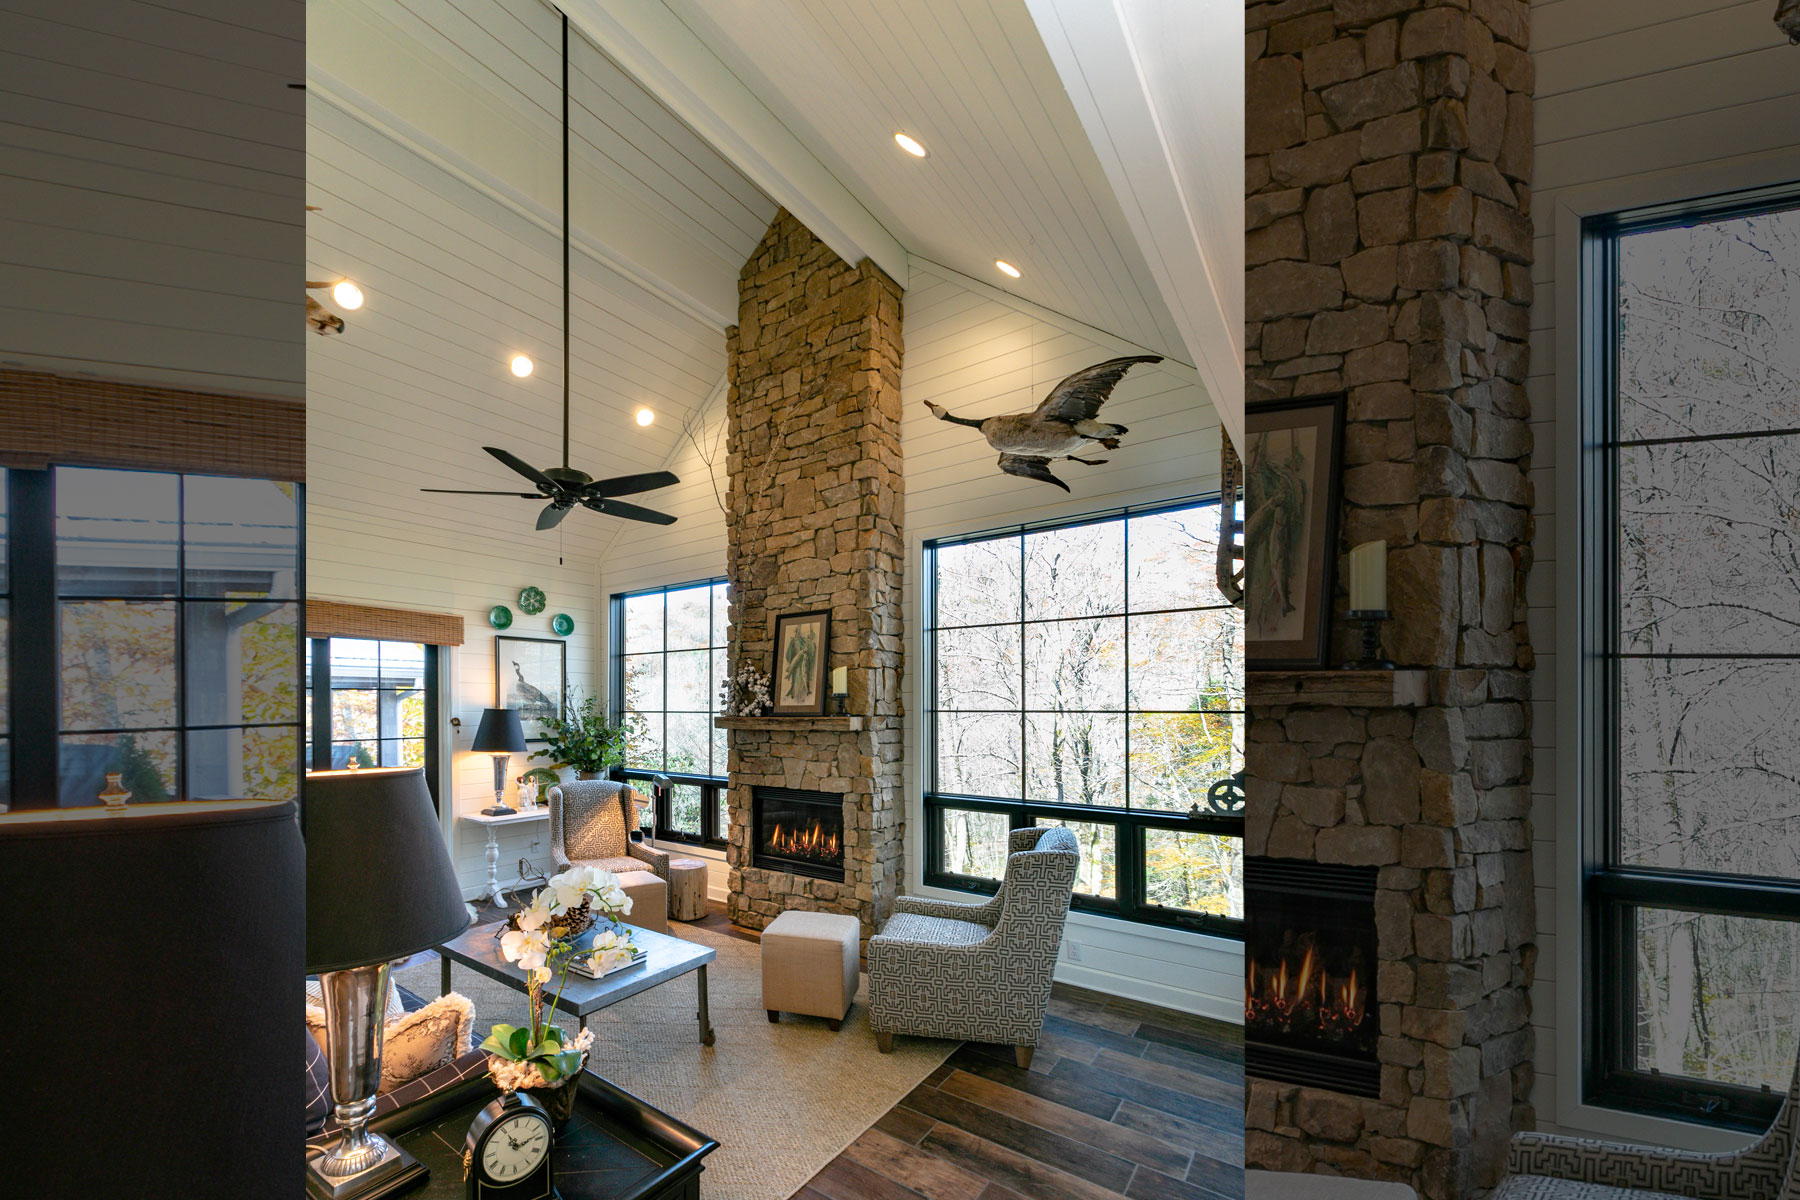 Stacked stone fireplace that reaches the ceiling in peaked room addition